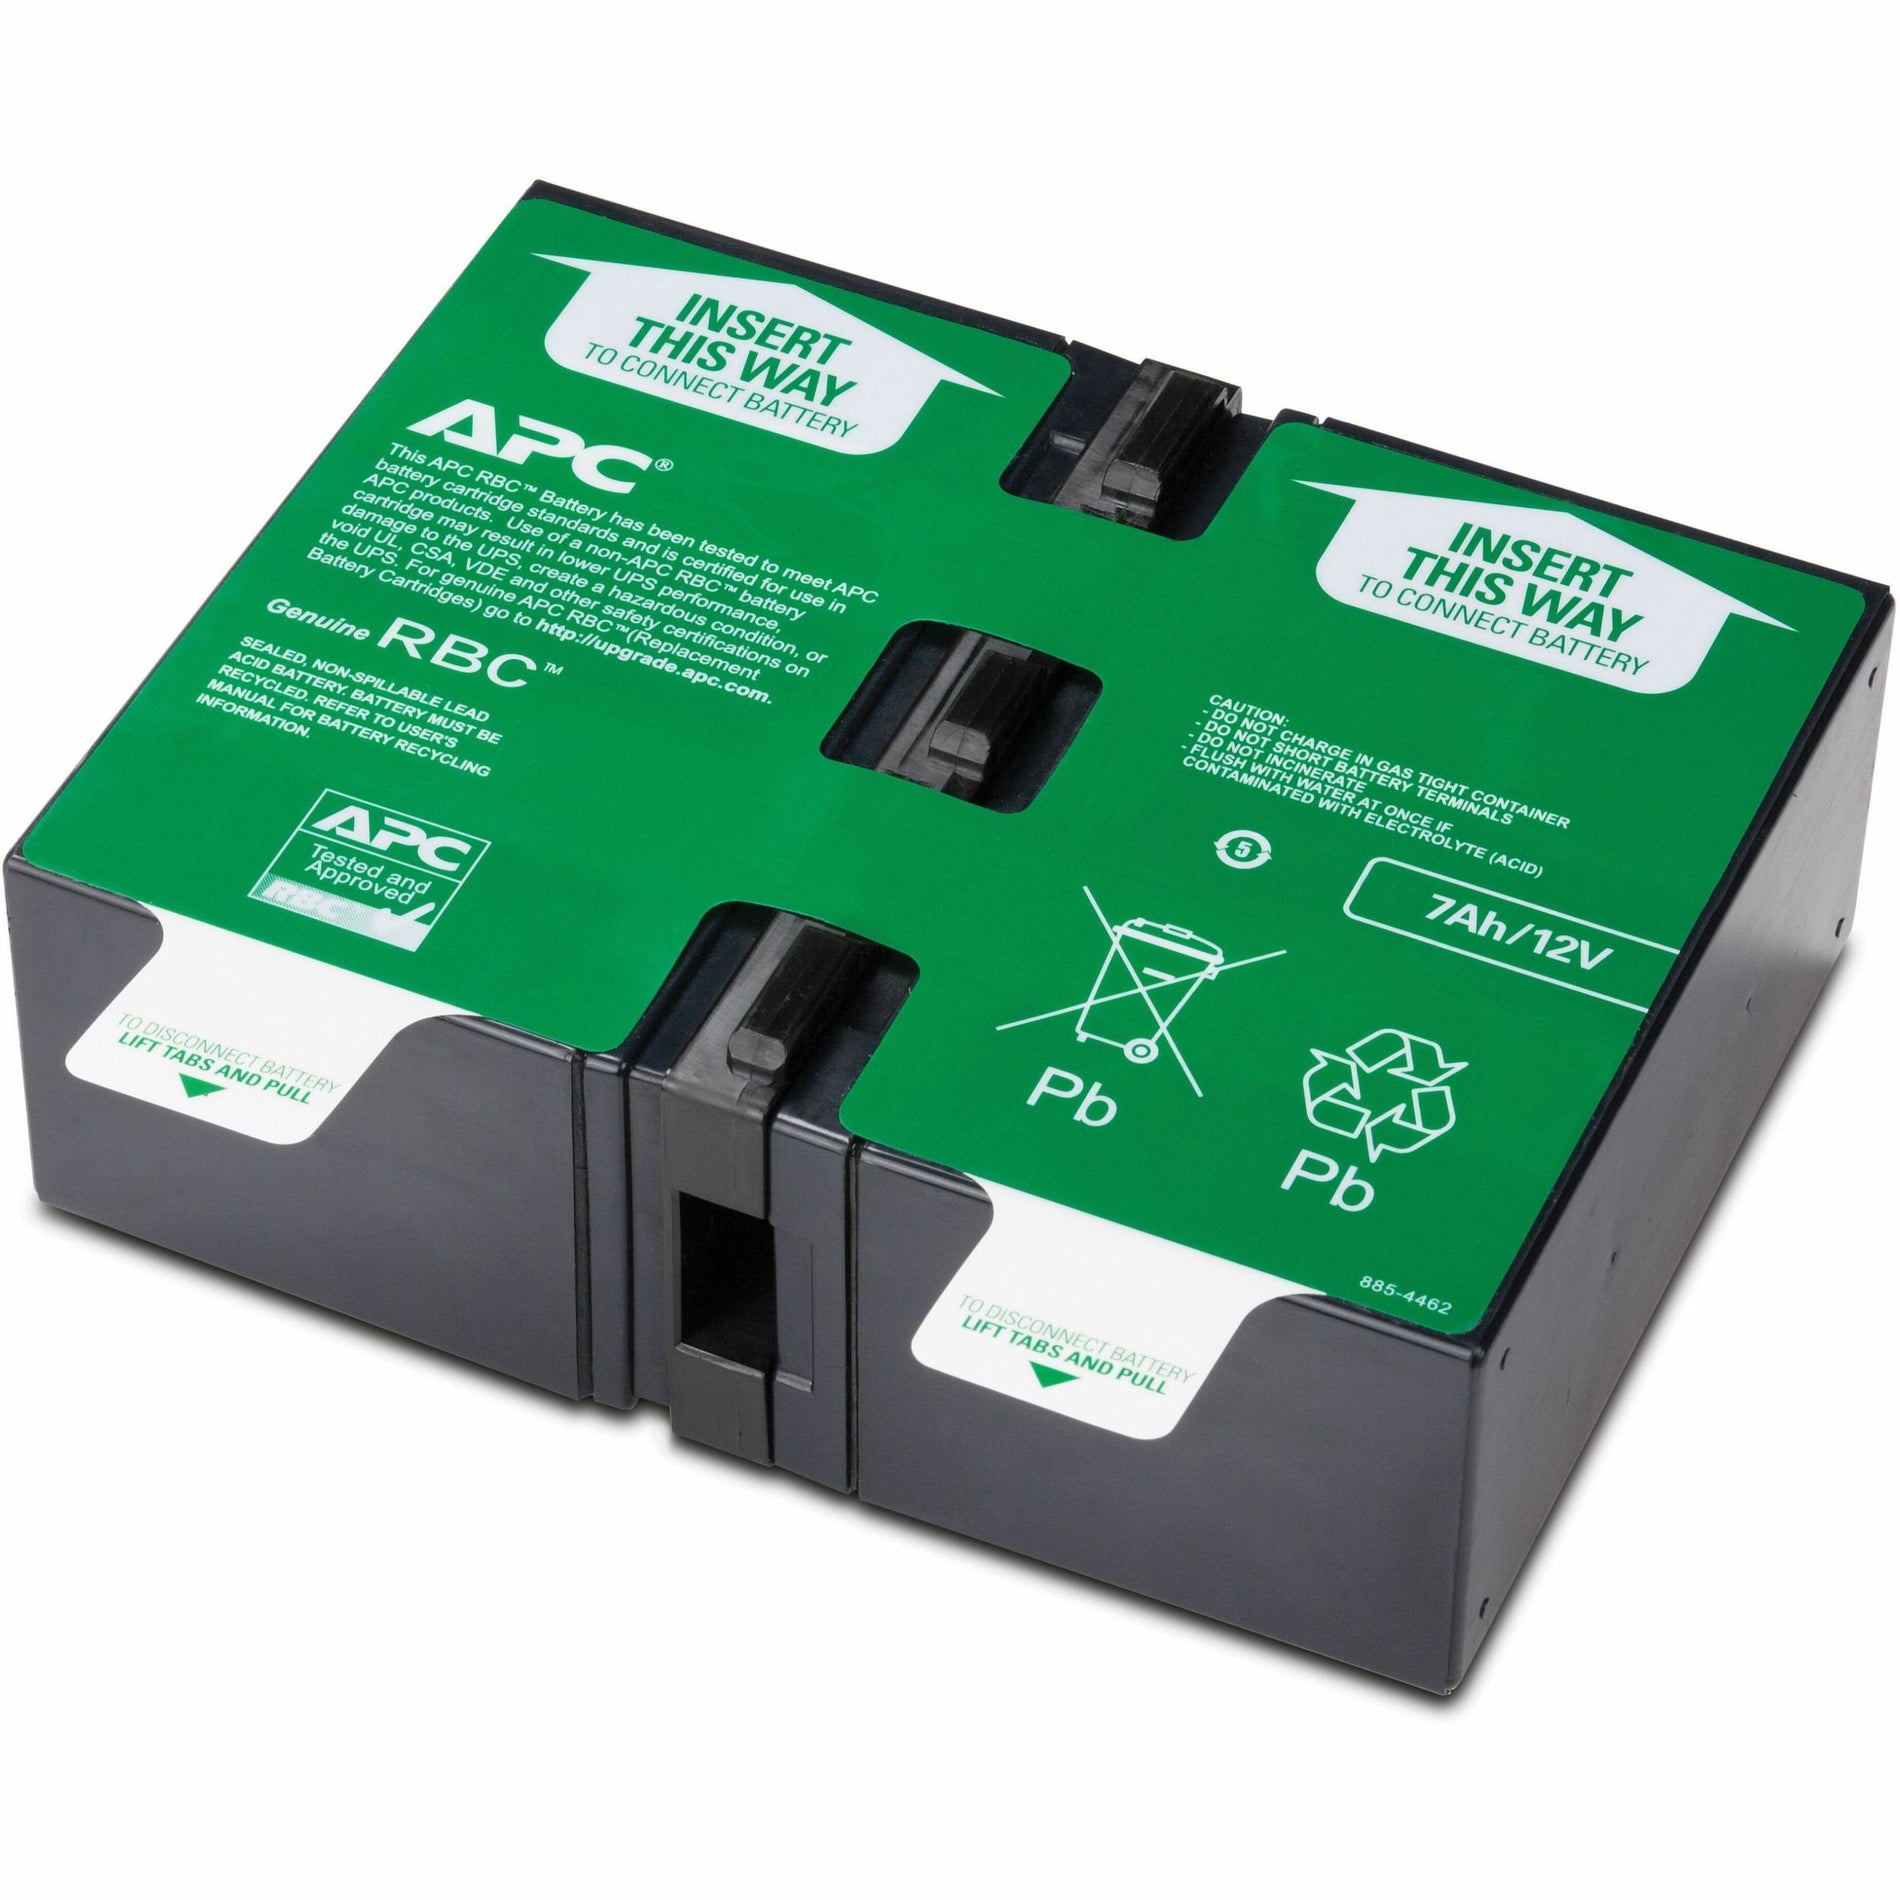 APC APCRBC123 UPS Replacement Battery Cartridge # 123, 2 Year Warranty, Lead Acid, Hot Swappable